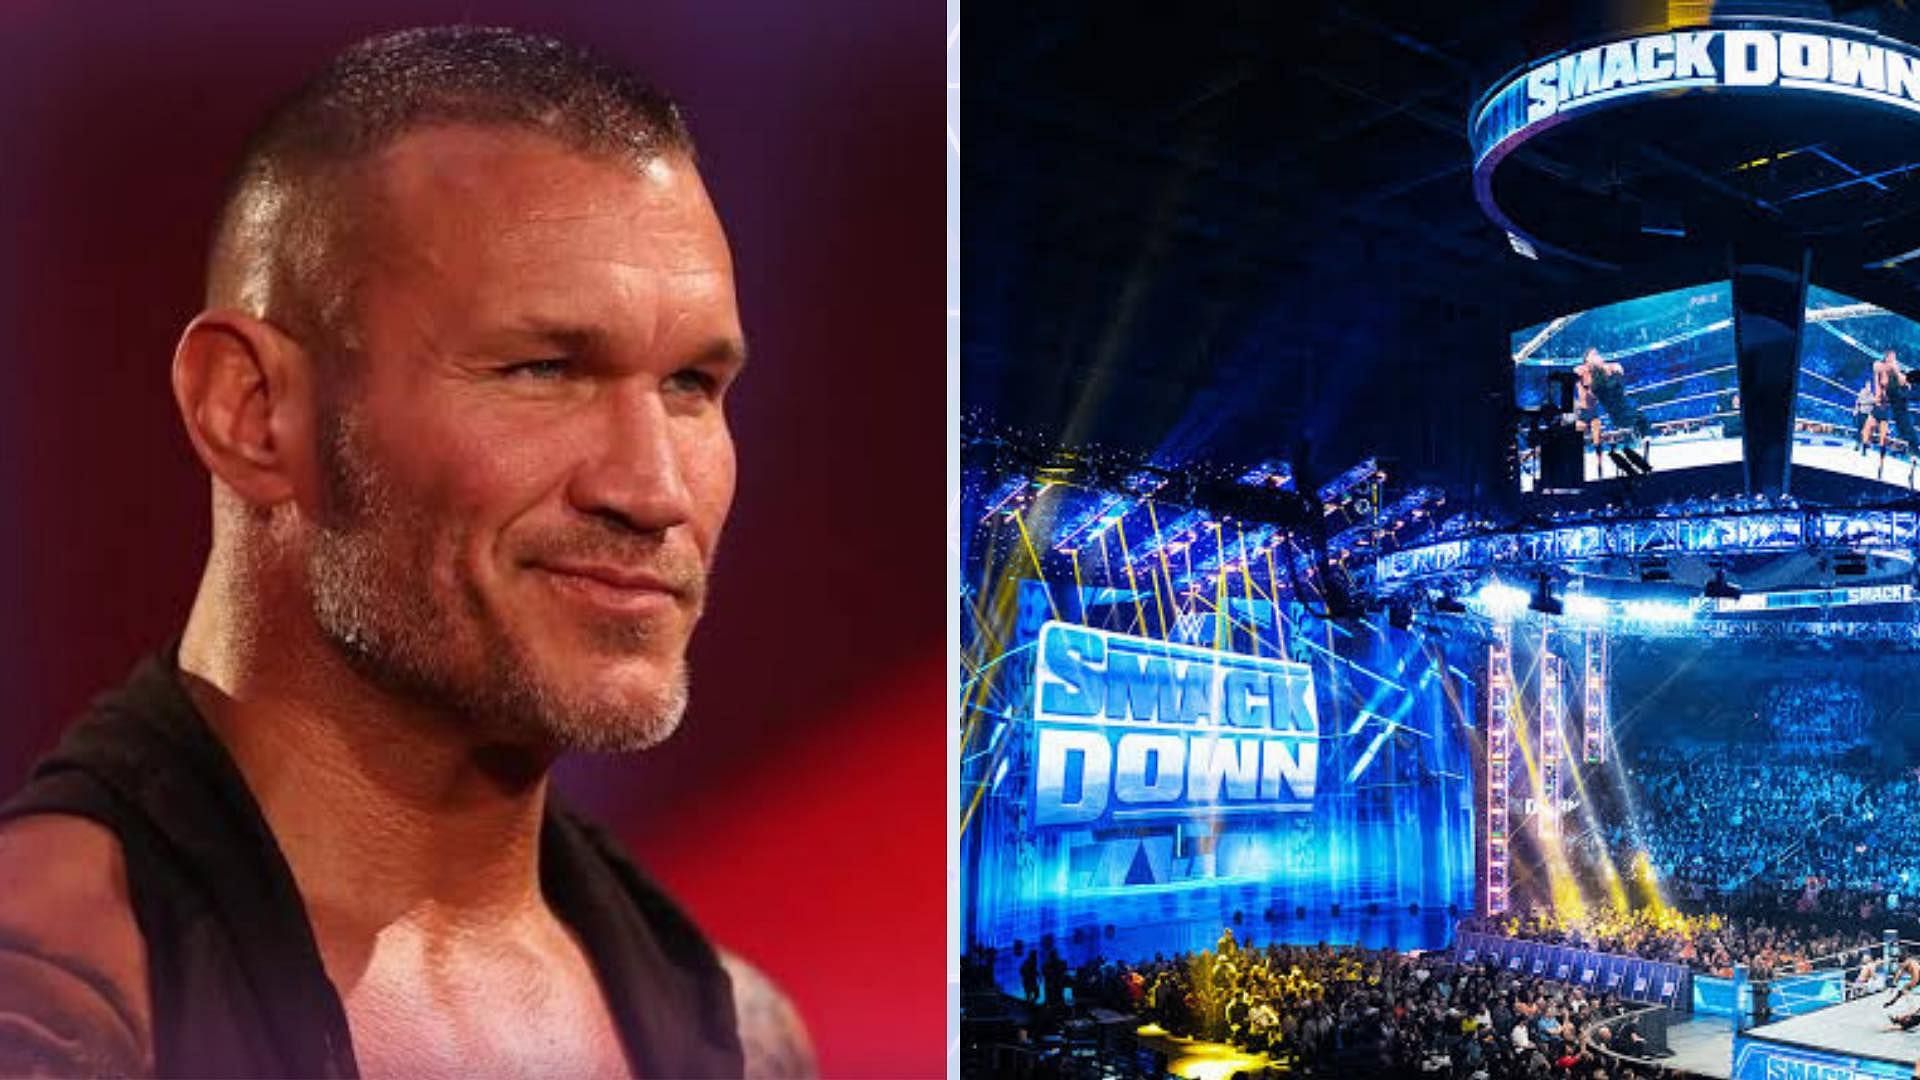 Randy Orton is scheduled to return to SmackDown this week